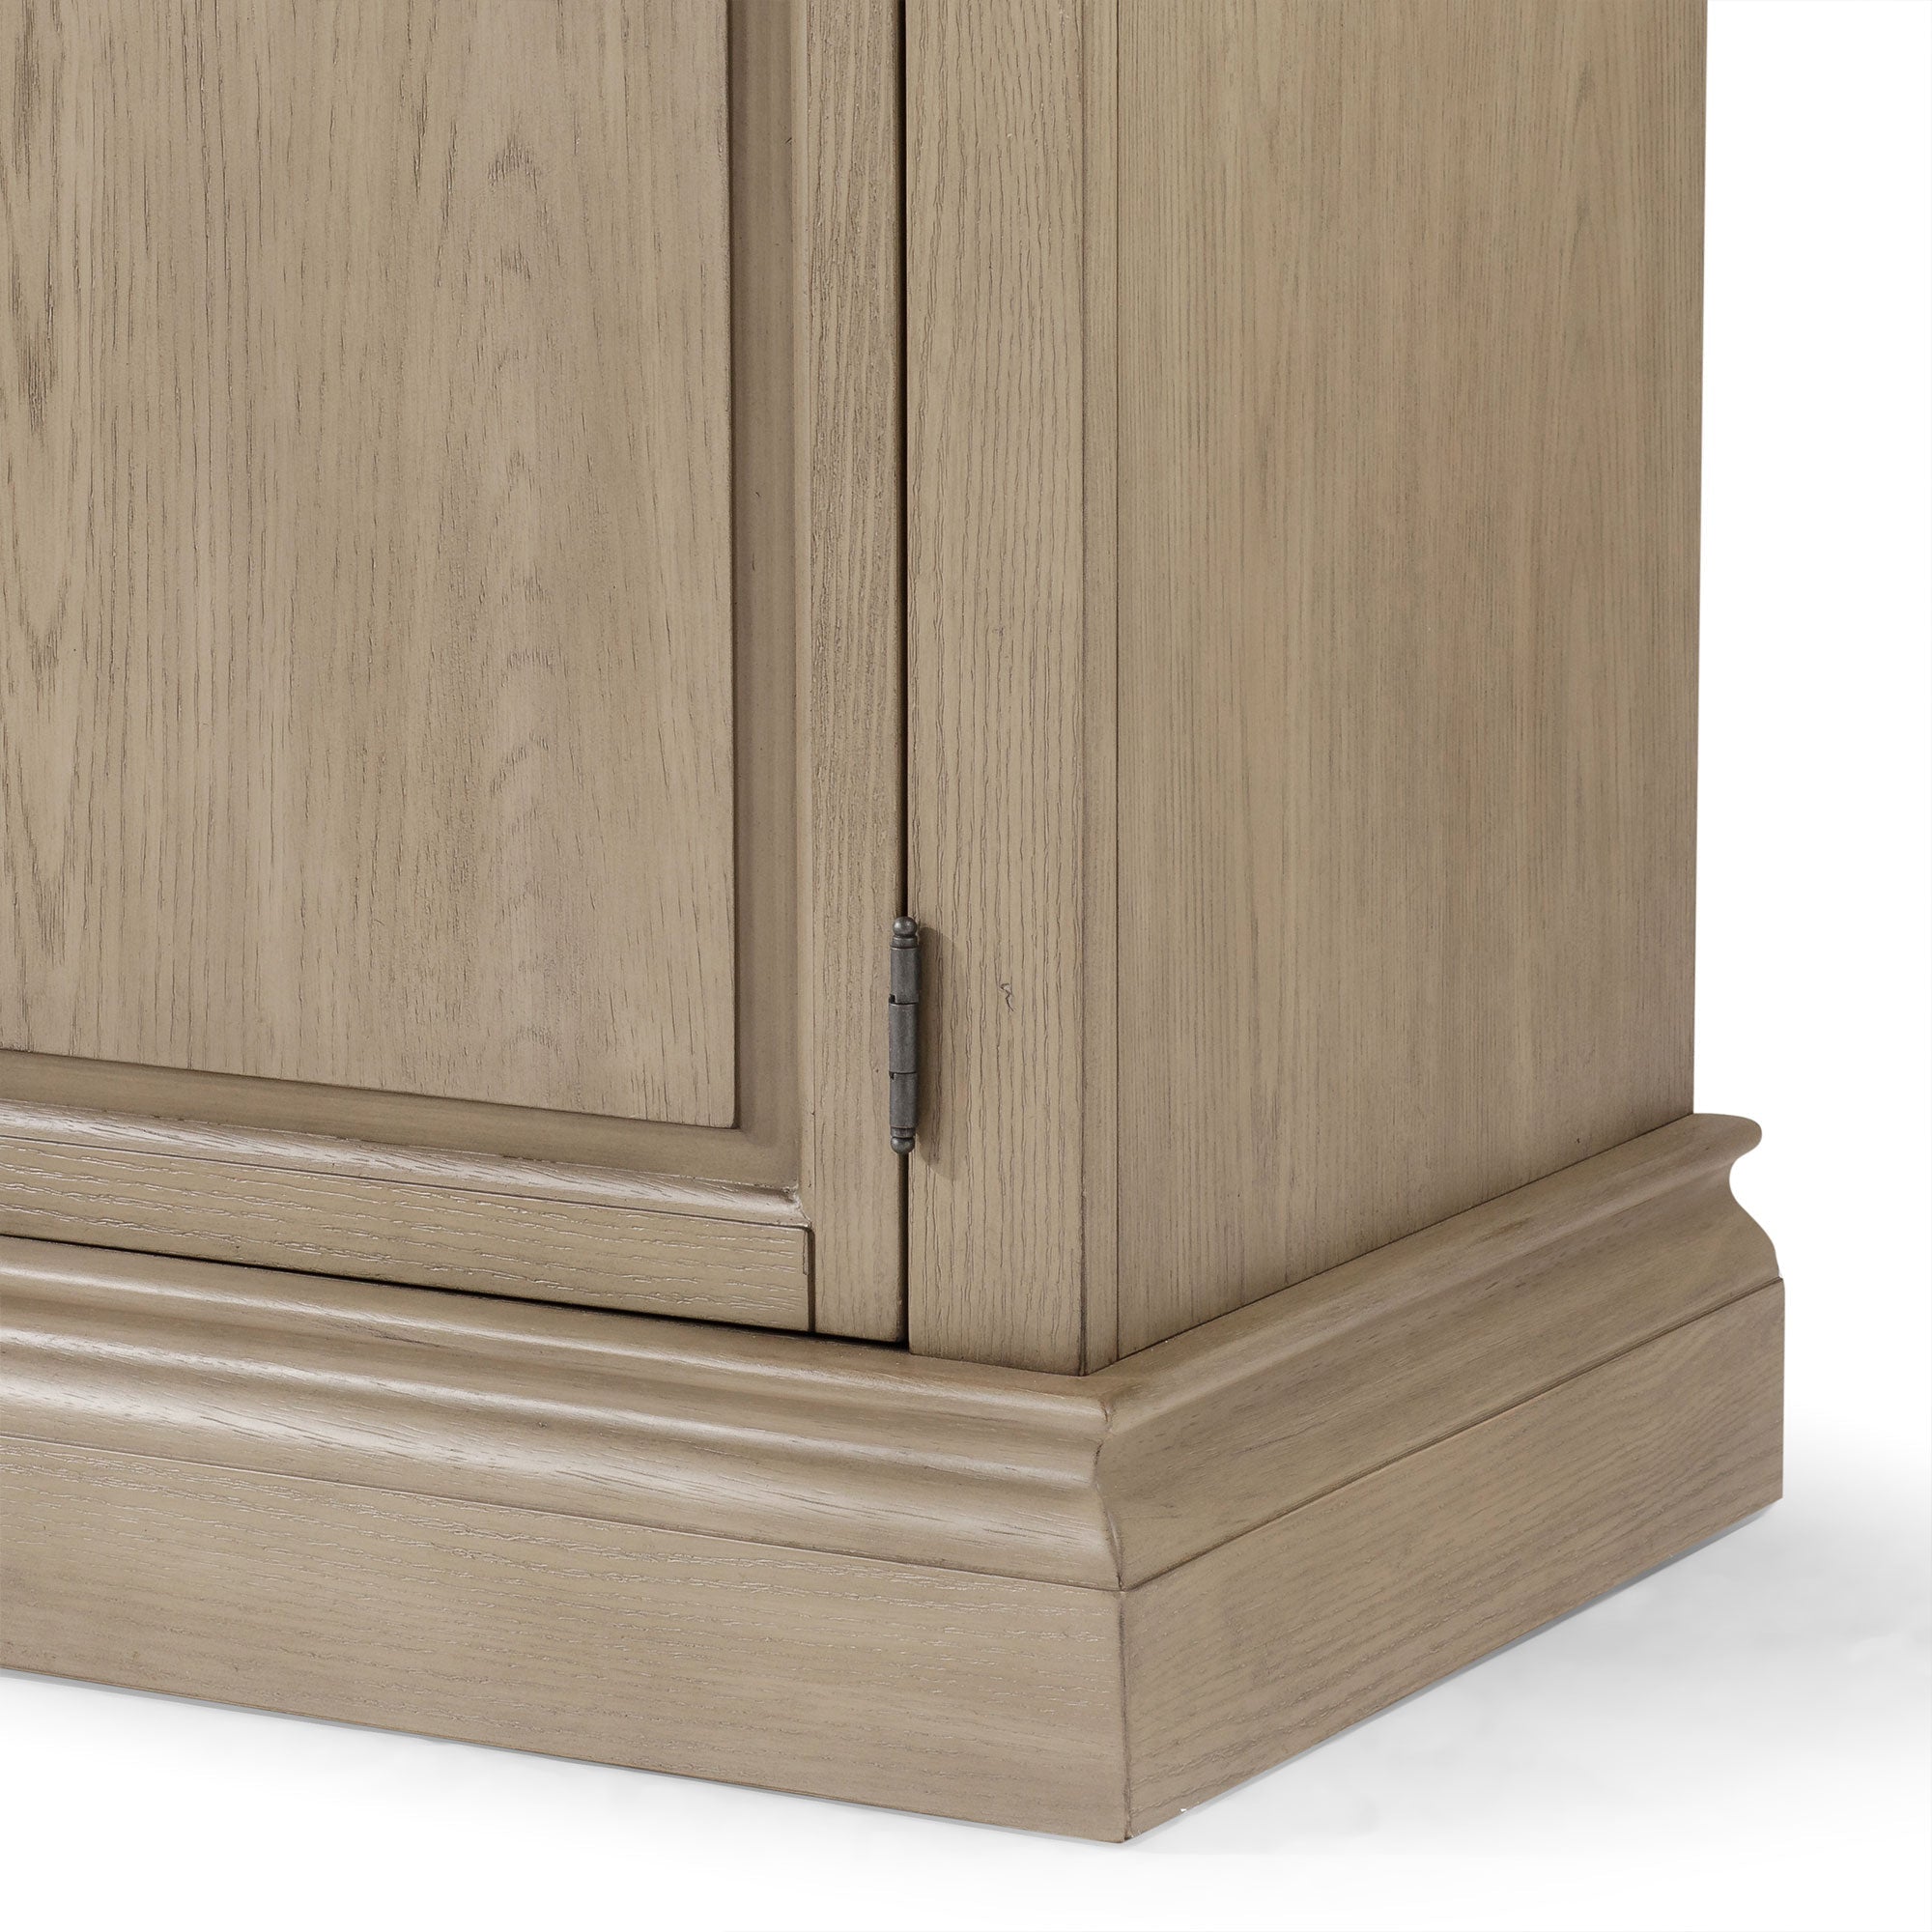 Theo Classical Wooden Sideboard in Antiqued Grey Finish in Cabinets by Maven Lane